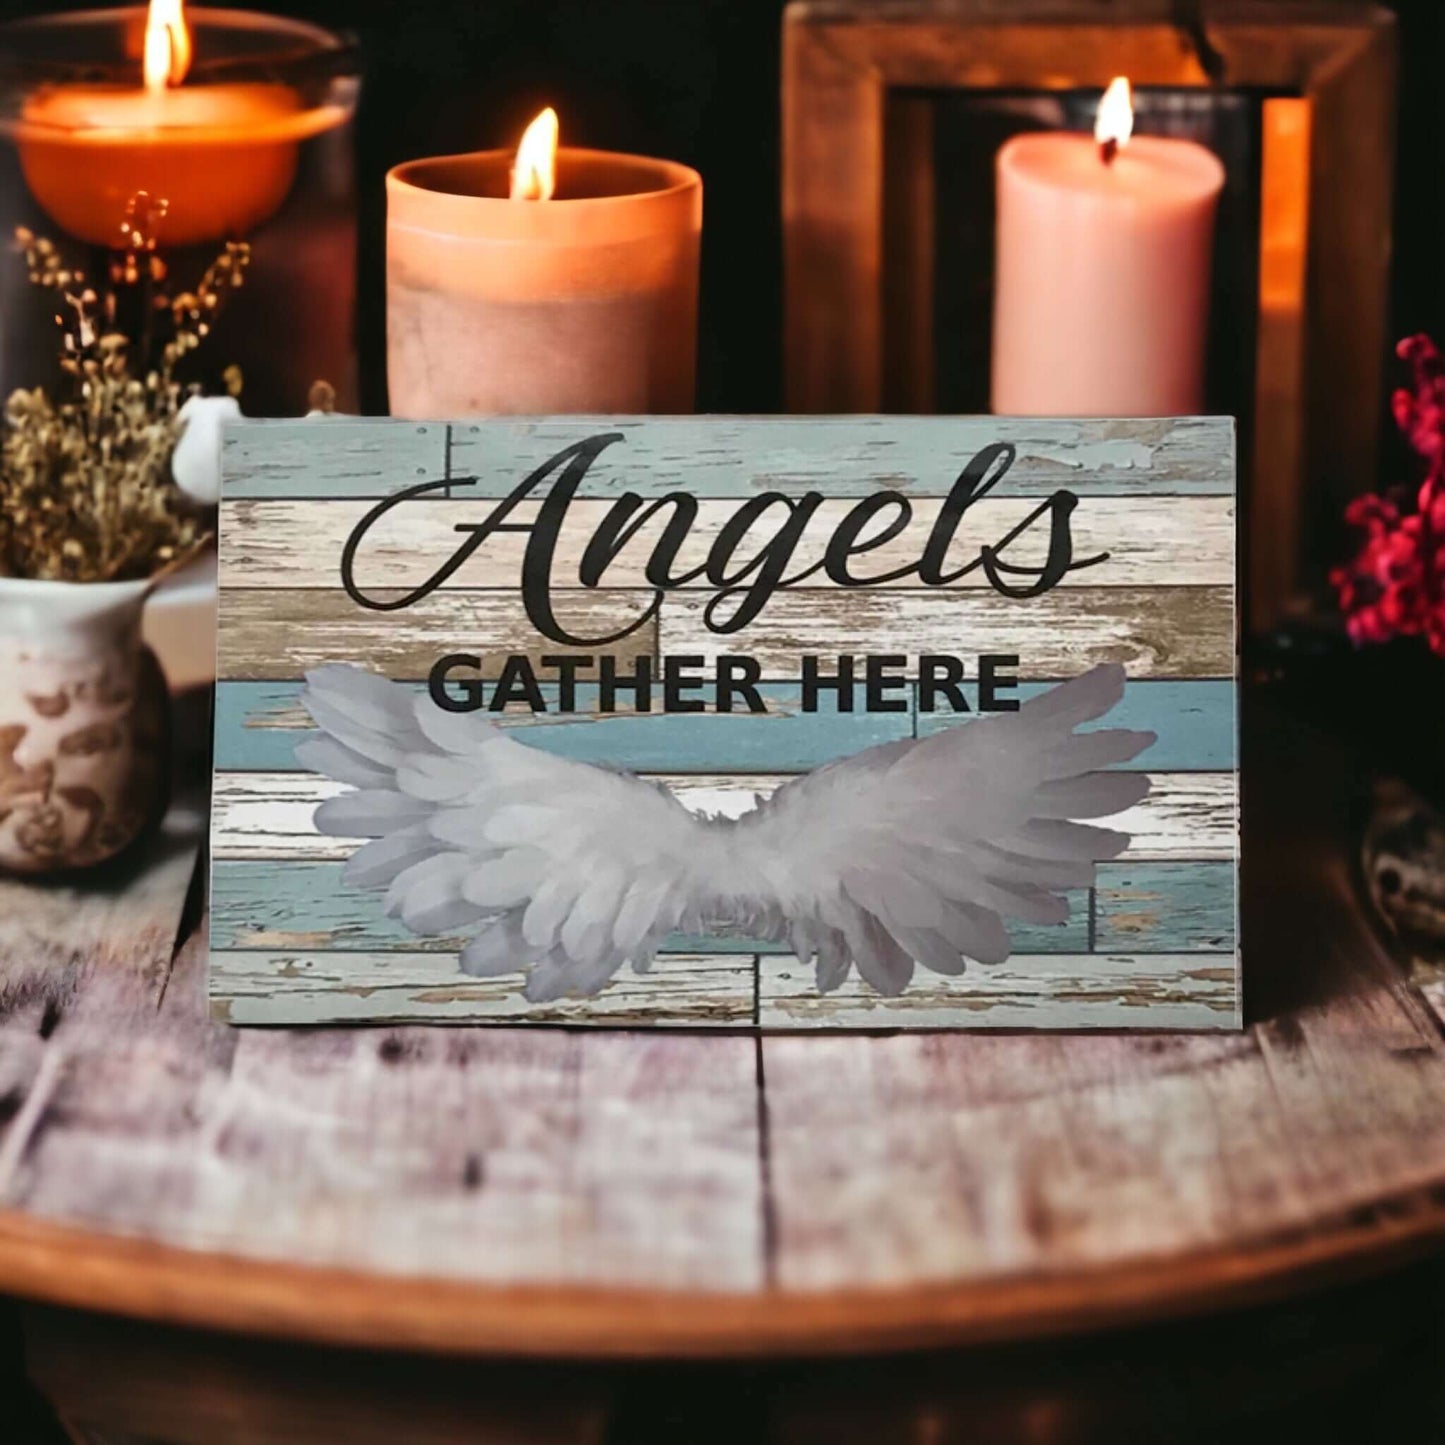 Angels Gather Here Rustic Blue Sign - The Renmy Store Homewares & Gifts 